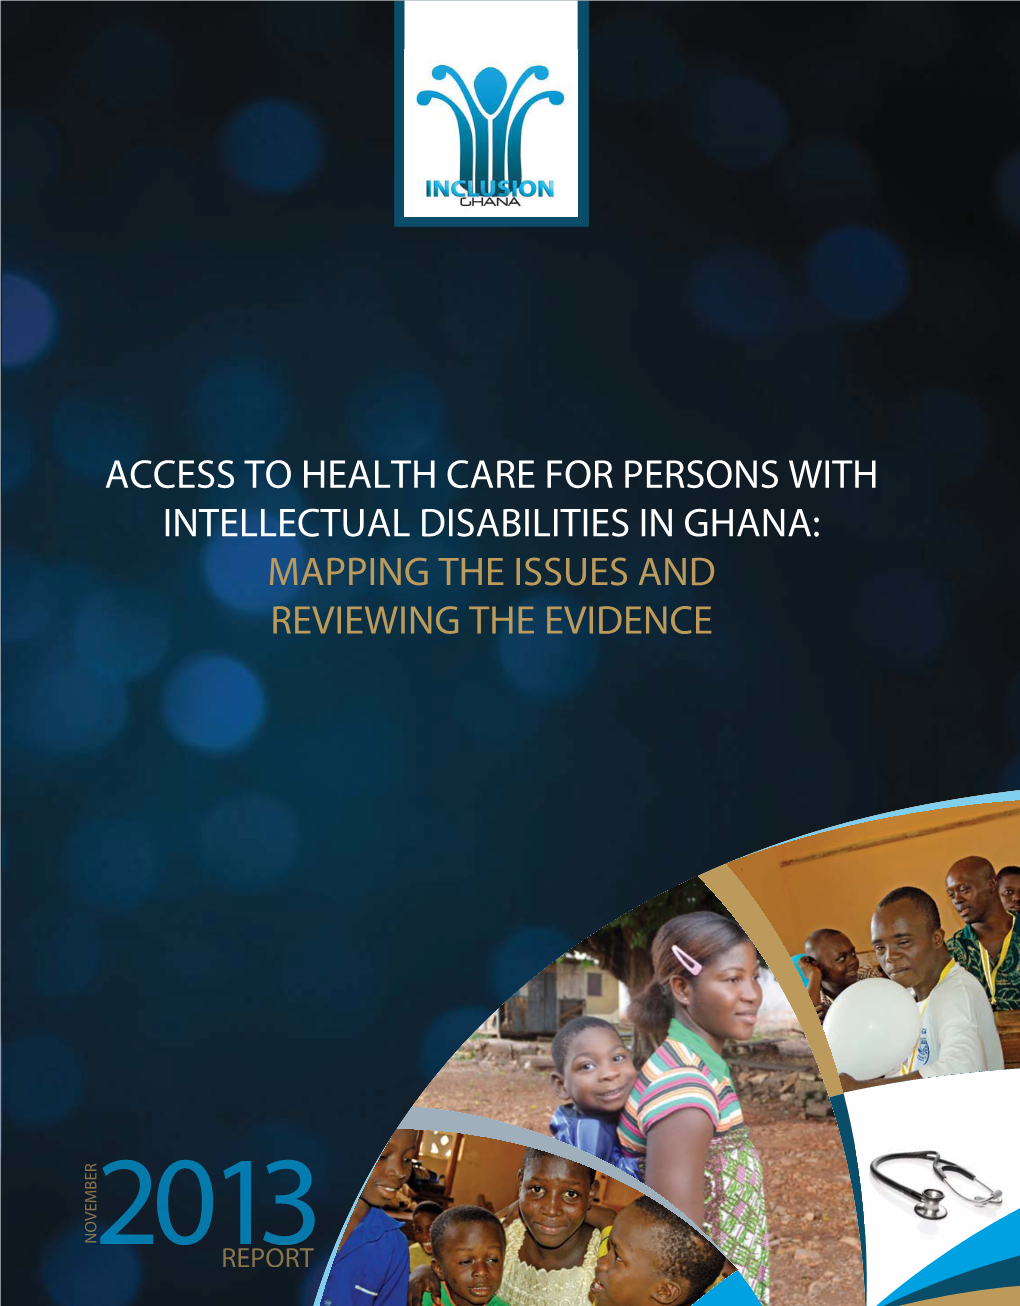 Access to Health Care for Persons with Intellectual Disabilities in Ghana: Mapping the Issues and Reviewing the Evidence